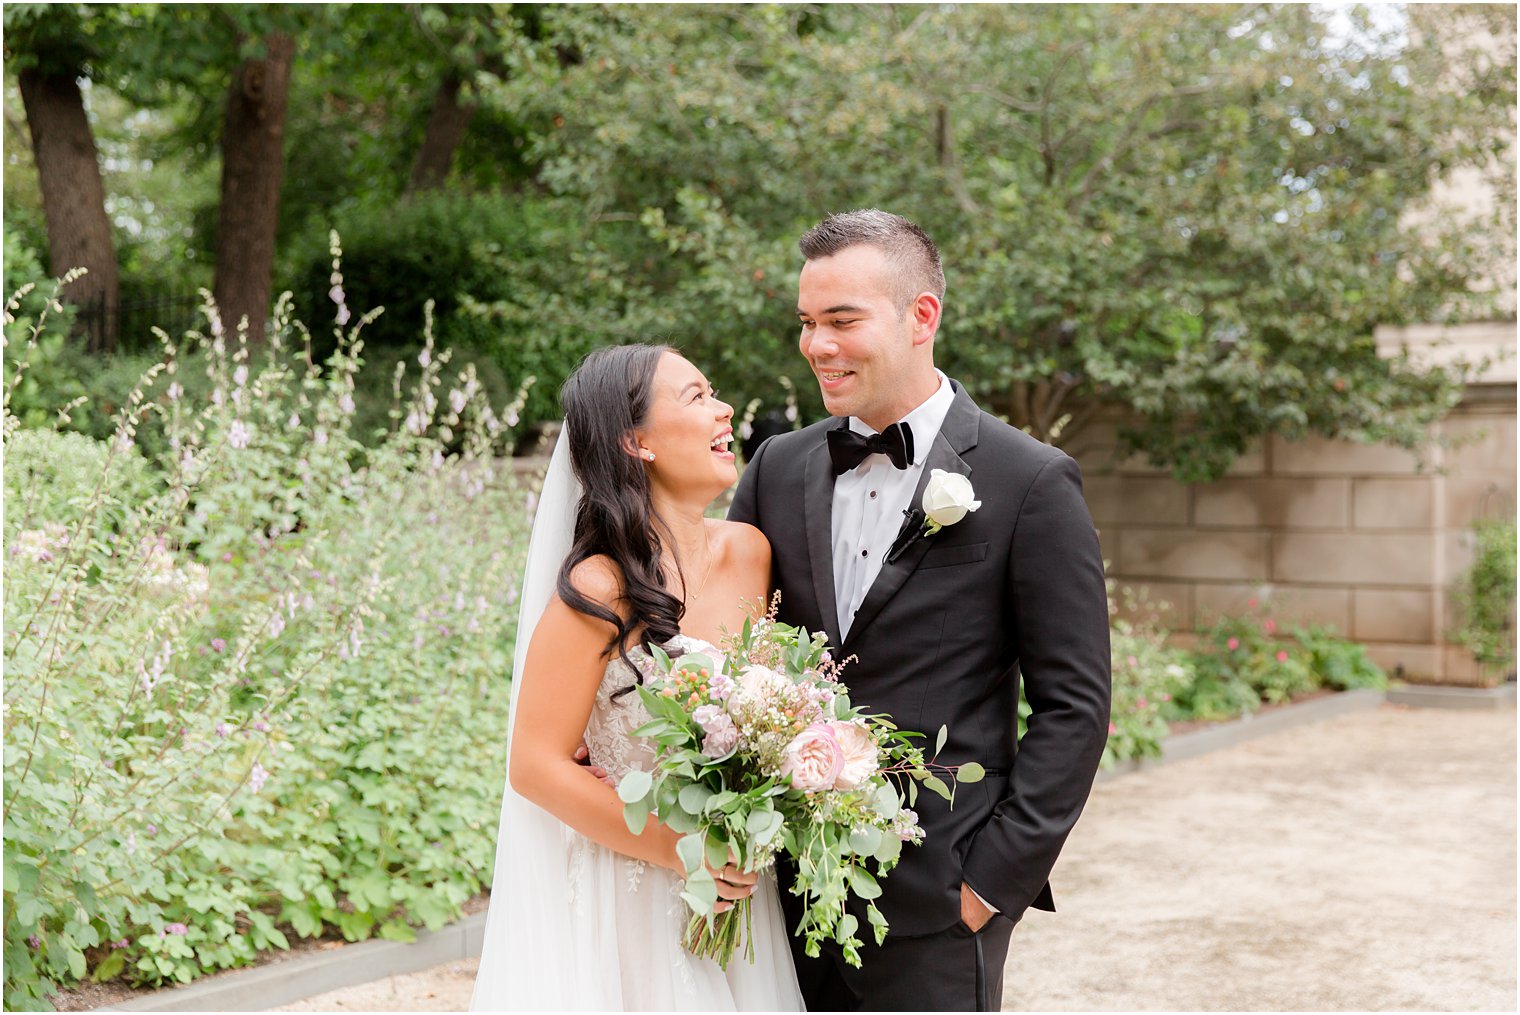 bride and groom laugh together in garden at the Rodin Museum